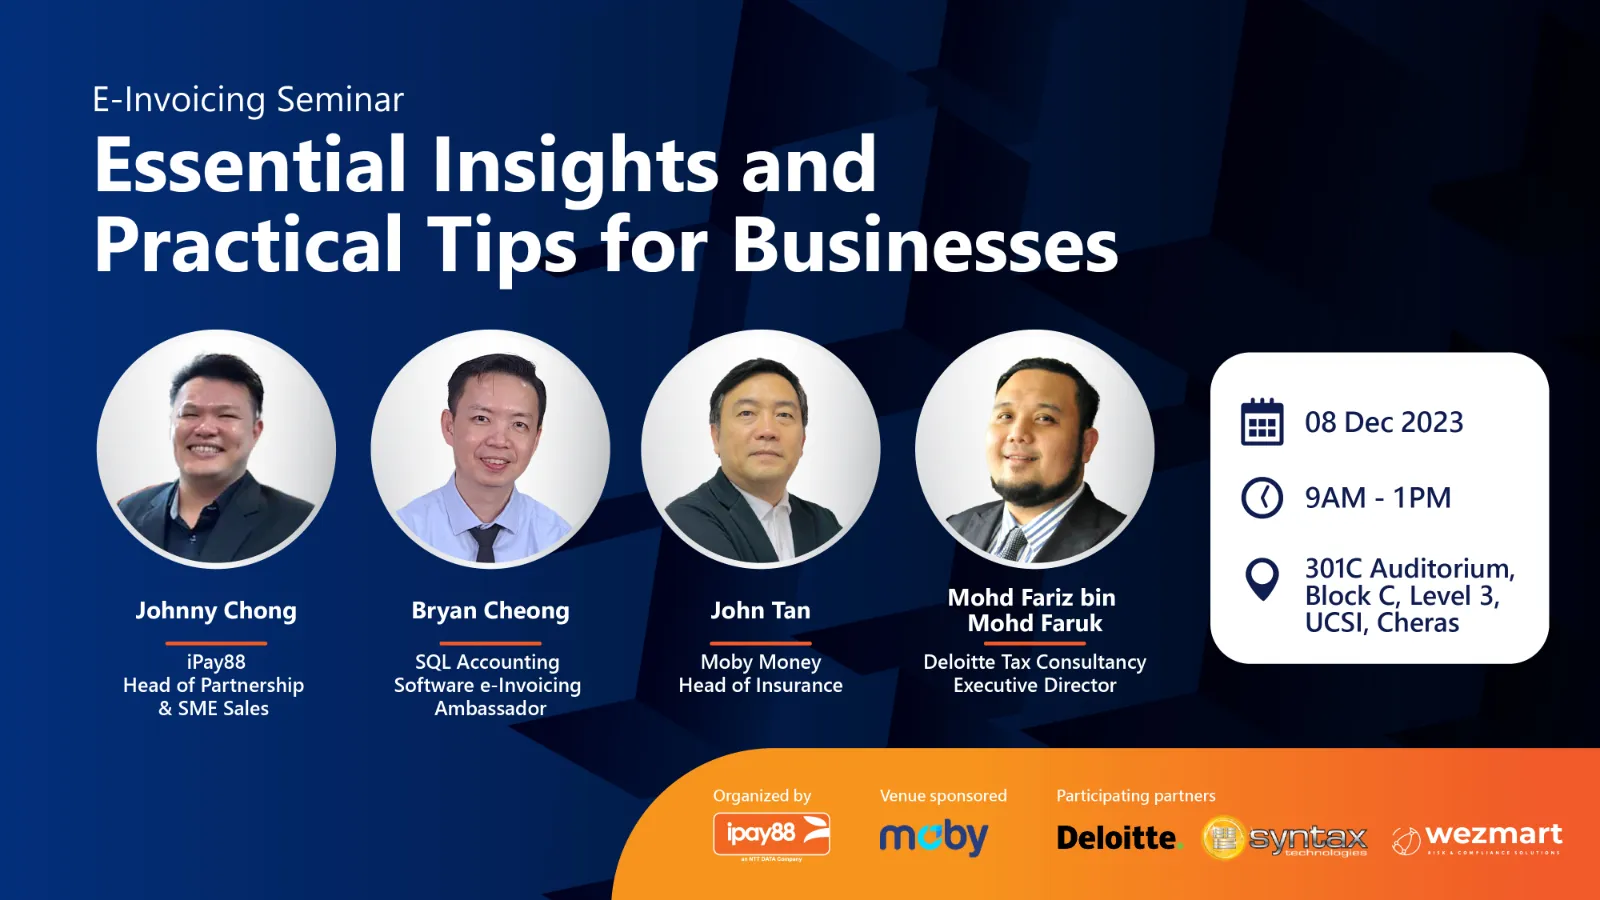 E-invoicing Seminar 2023 by iPay88 - Essentials Insights and Practical Tips for Businesses - iPay88